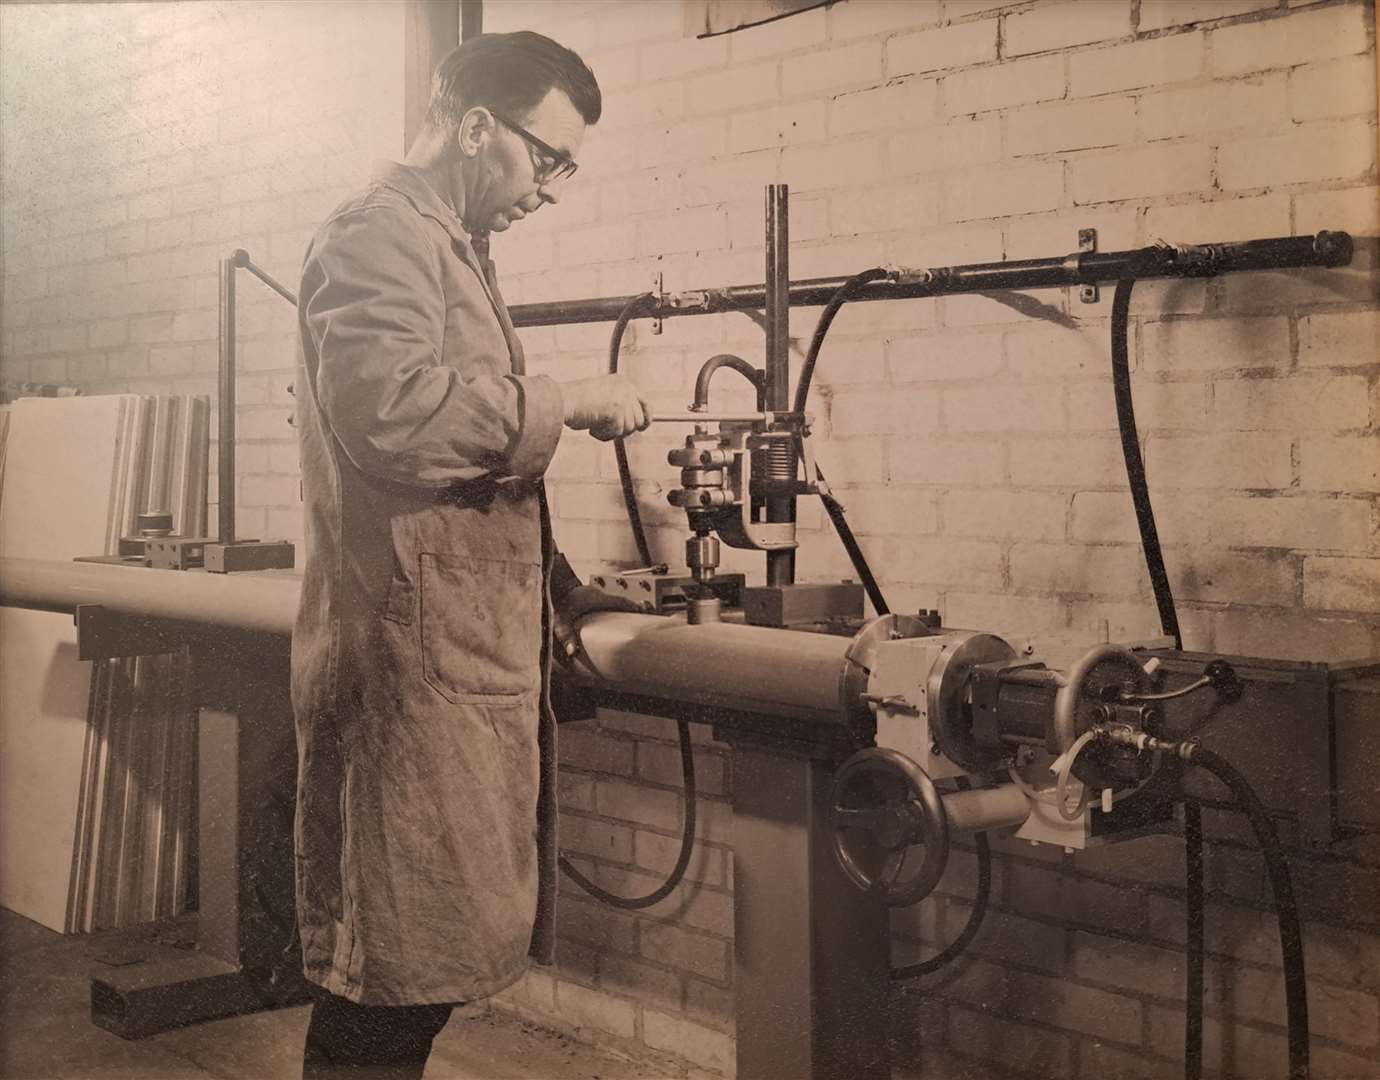 Bill Horn at work with Terrain Plastics in the 1960s